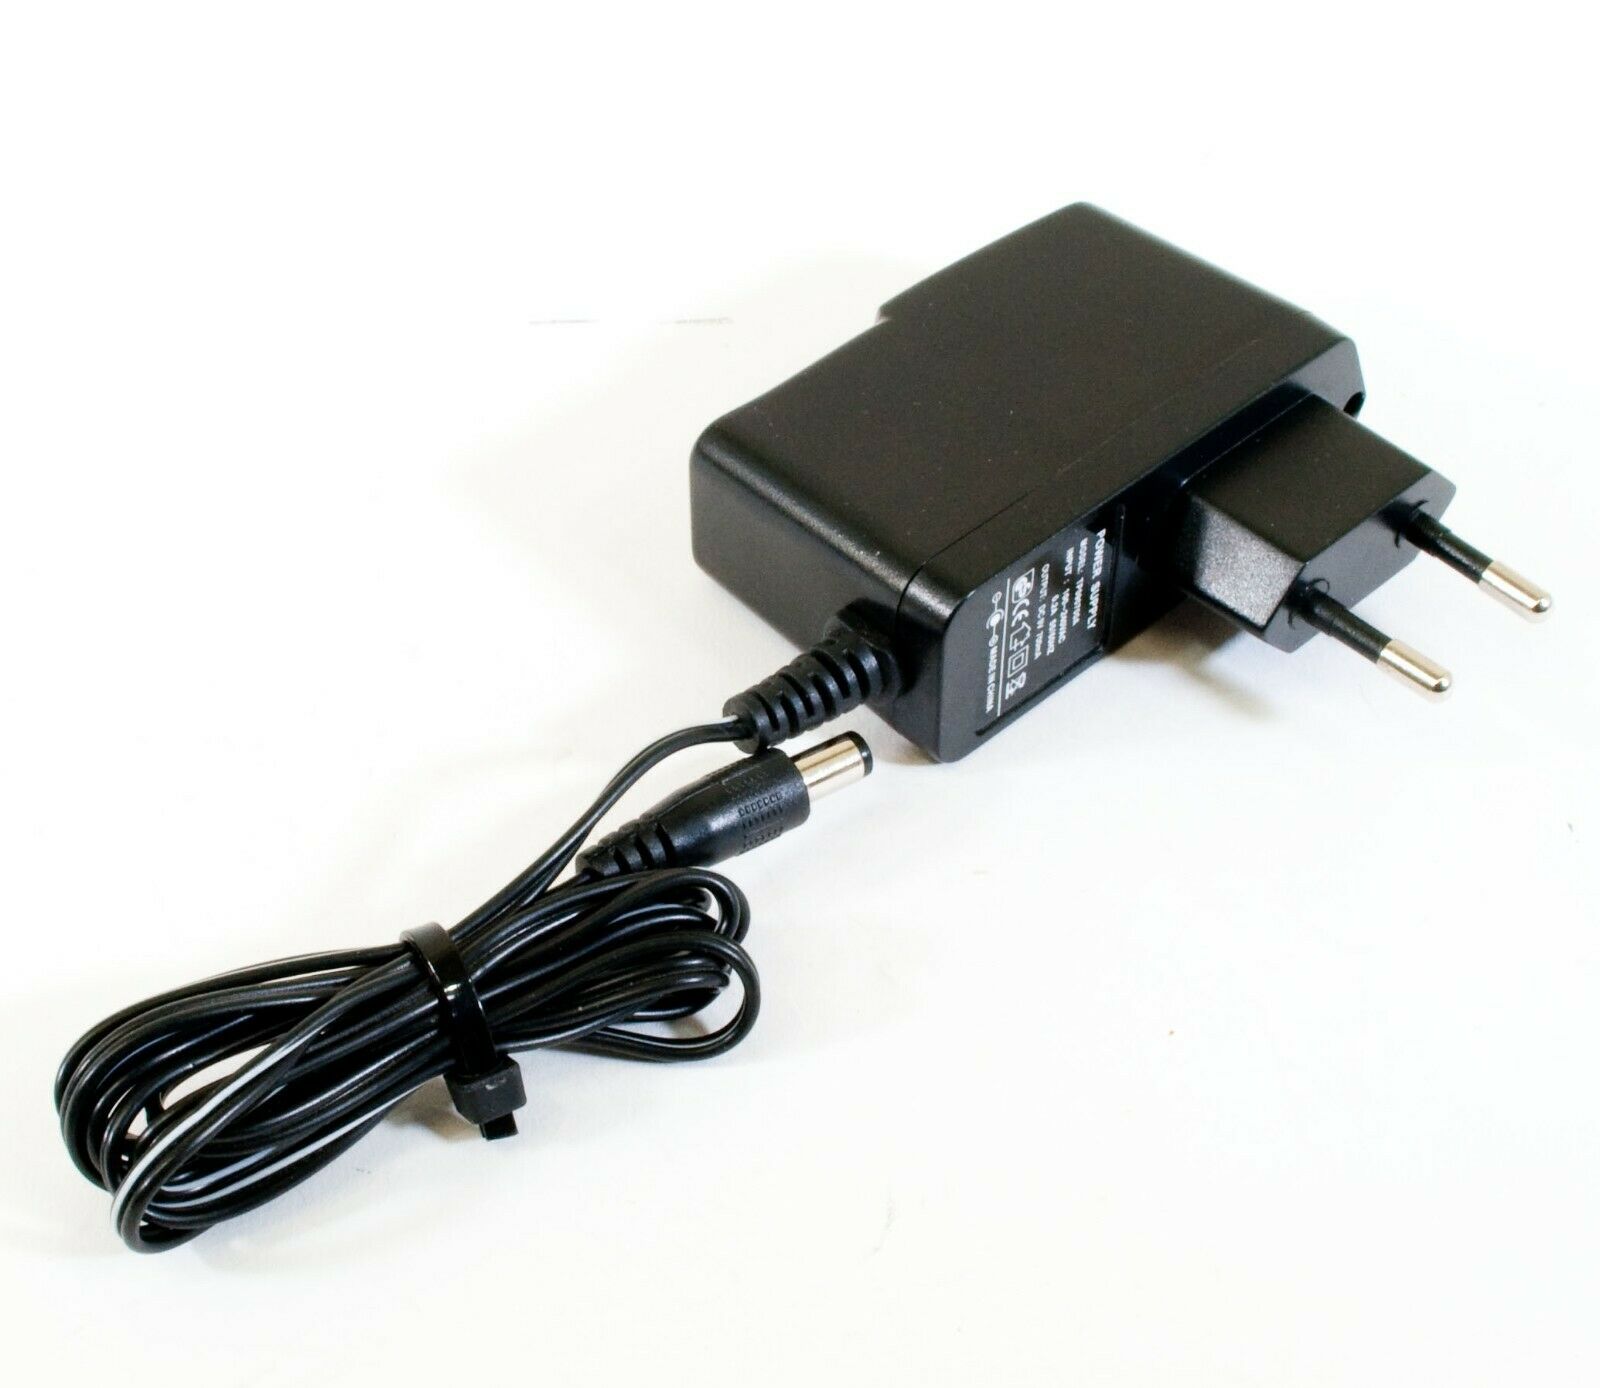 GS TP090700A AC Adapter 9V 700mA Original Charger Power Supply Output Current: 700 mA Voltage: 9